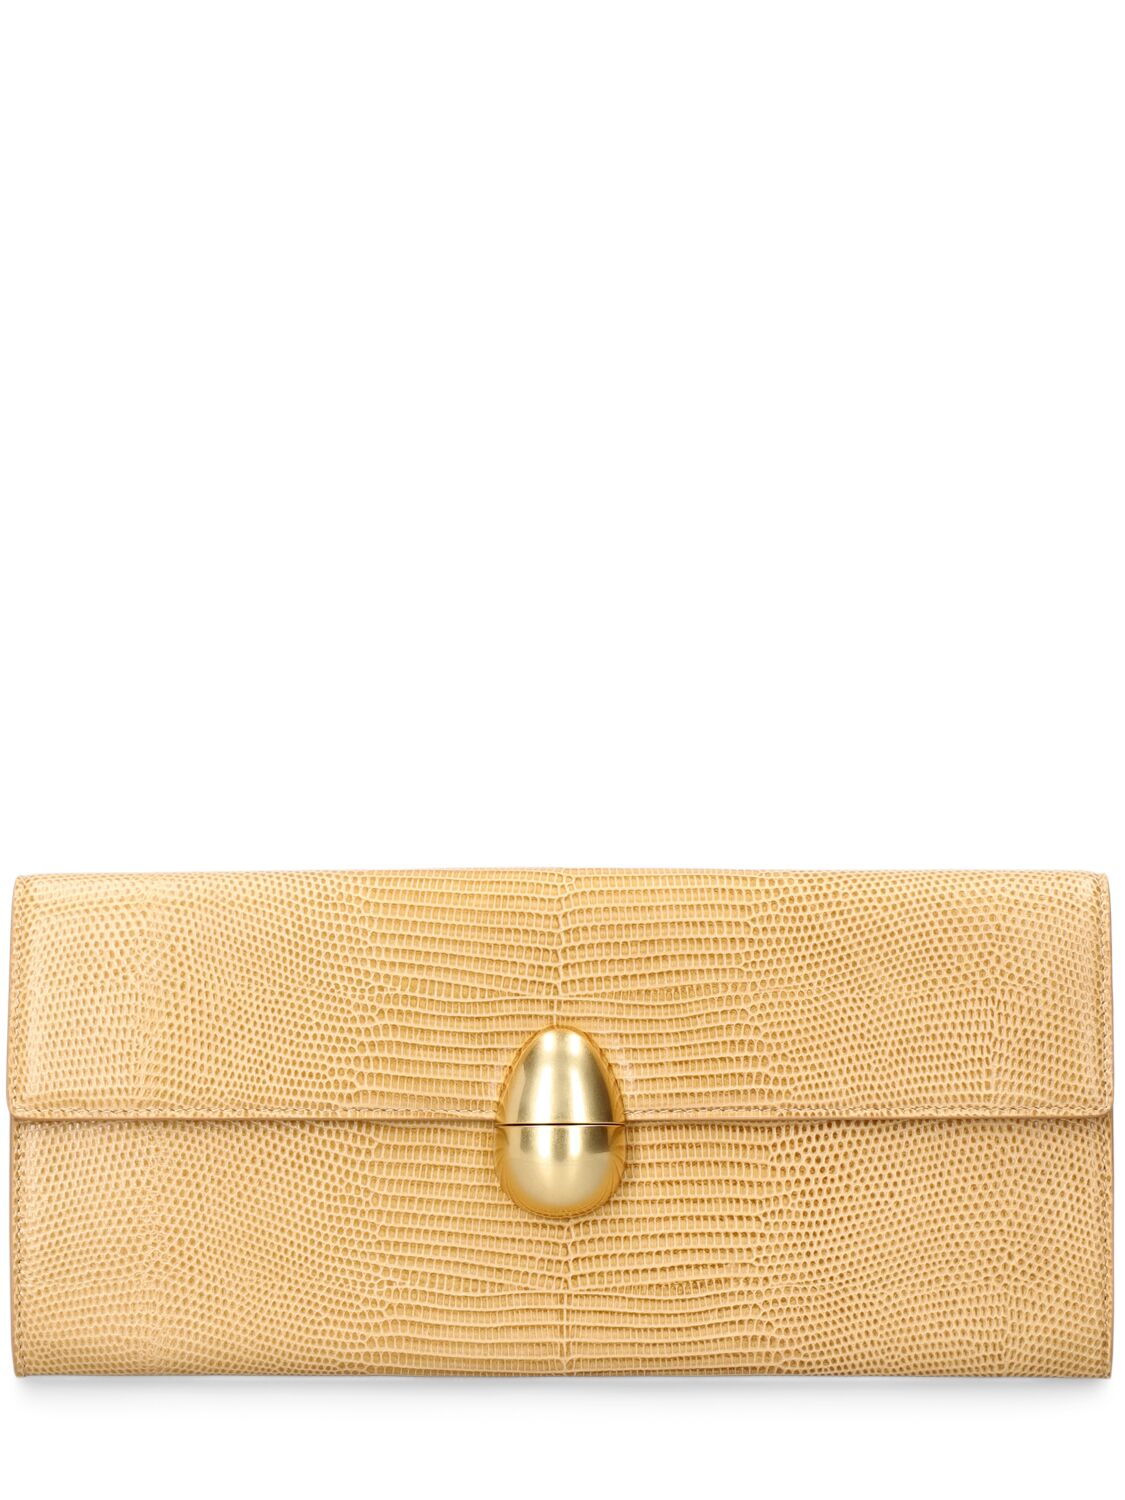 Image of Phoenix Embossed Leather Clutch